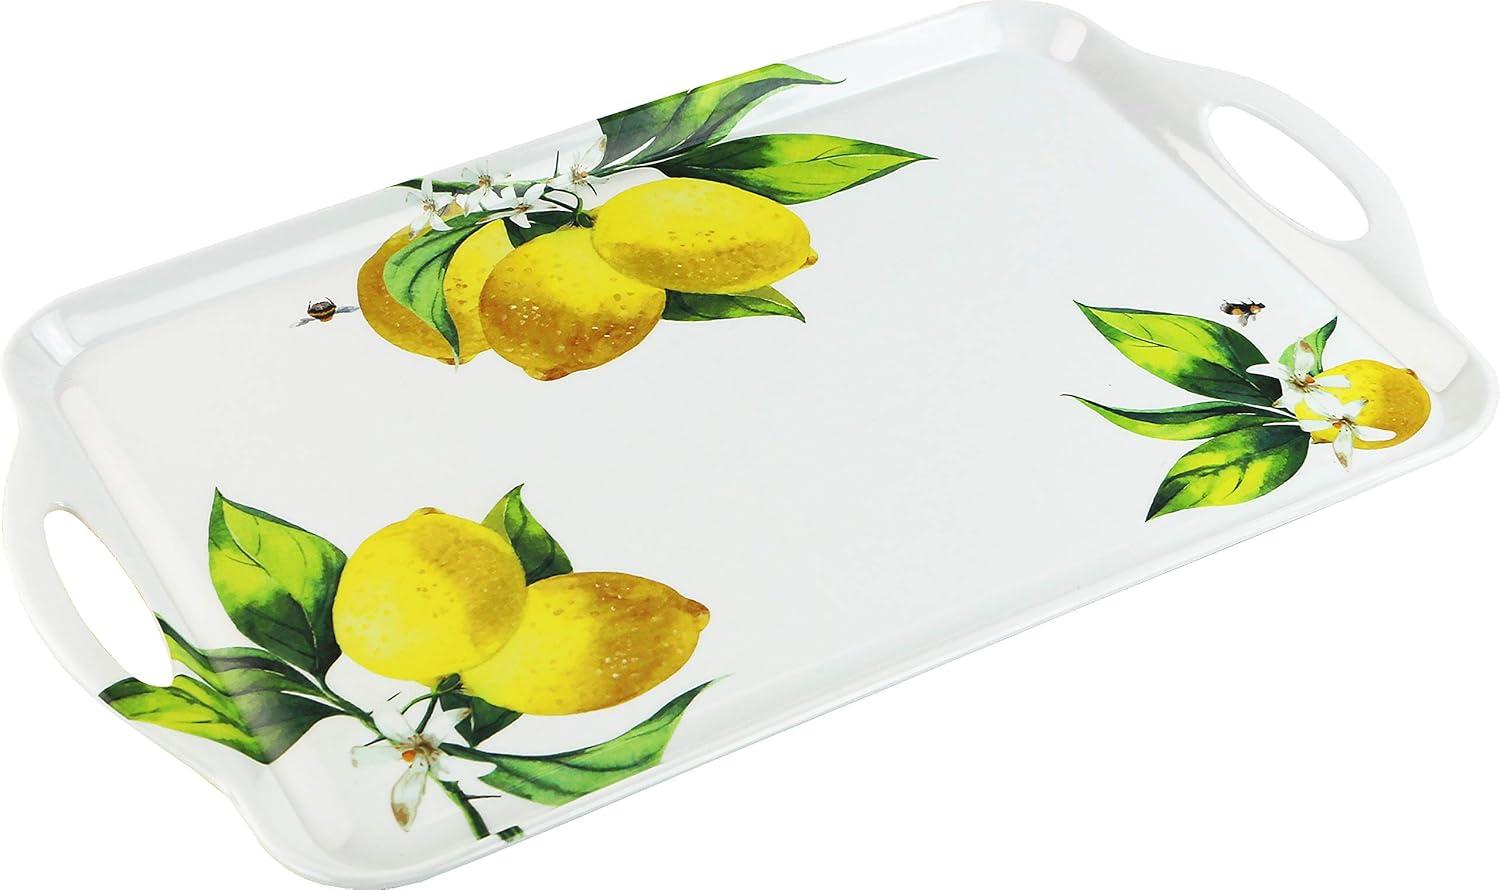 Calypso Essentials Polished Melamine Large Tray in White & Green with Lemon Motif